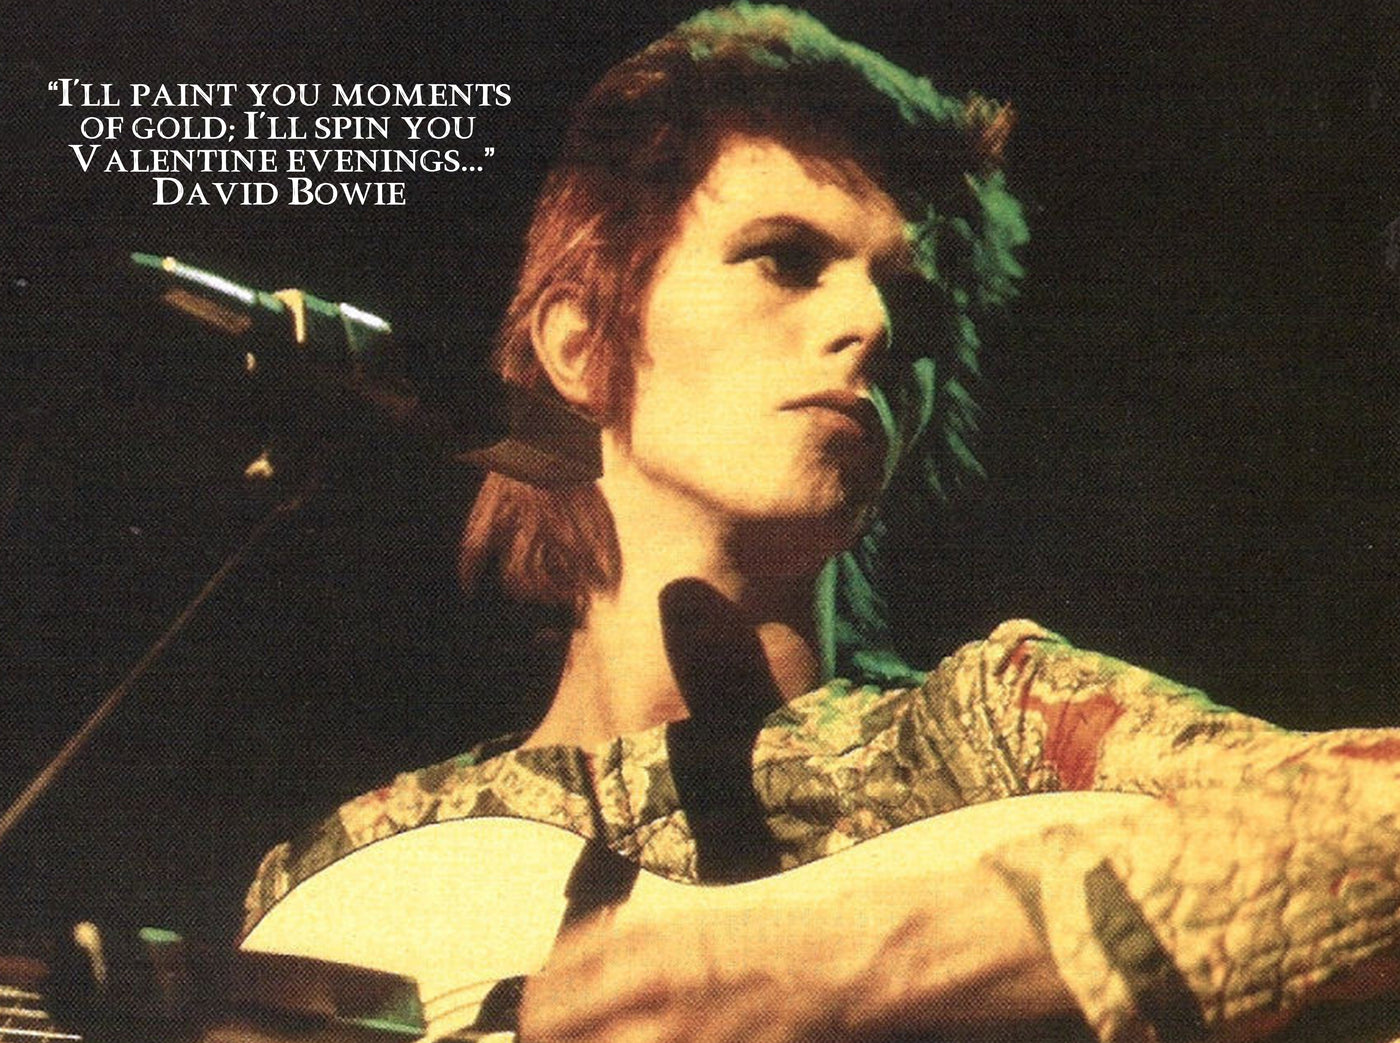 BOWIE QUOTES "I'll Paint You Moments of Gold"